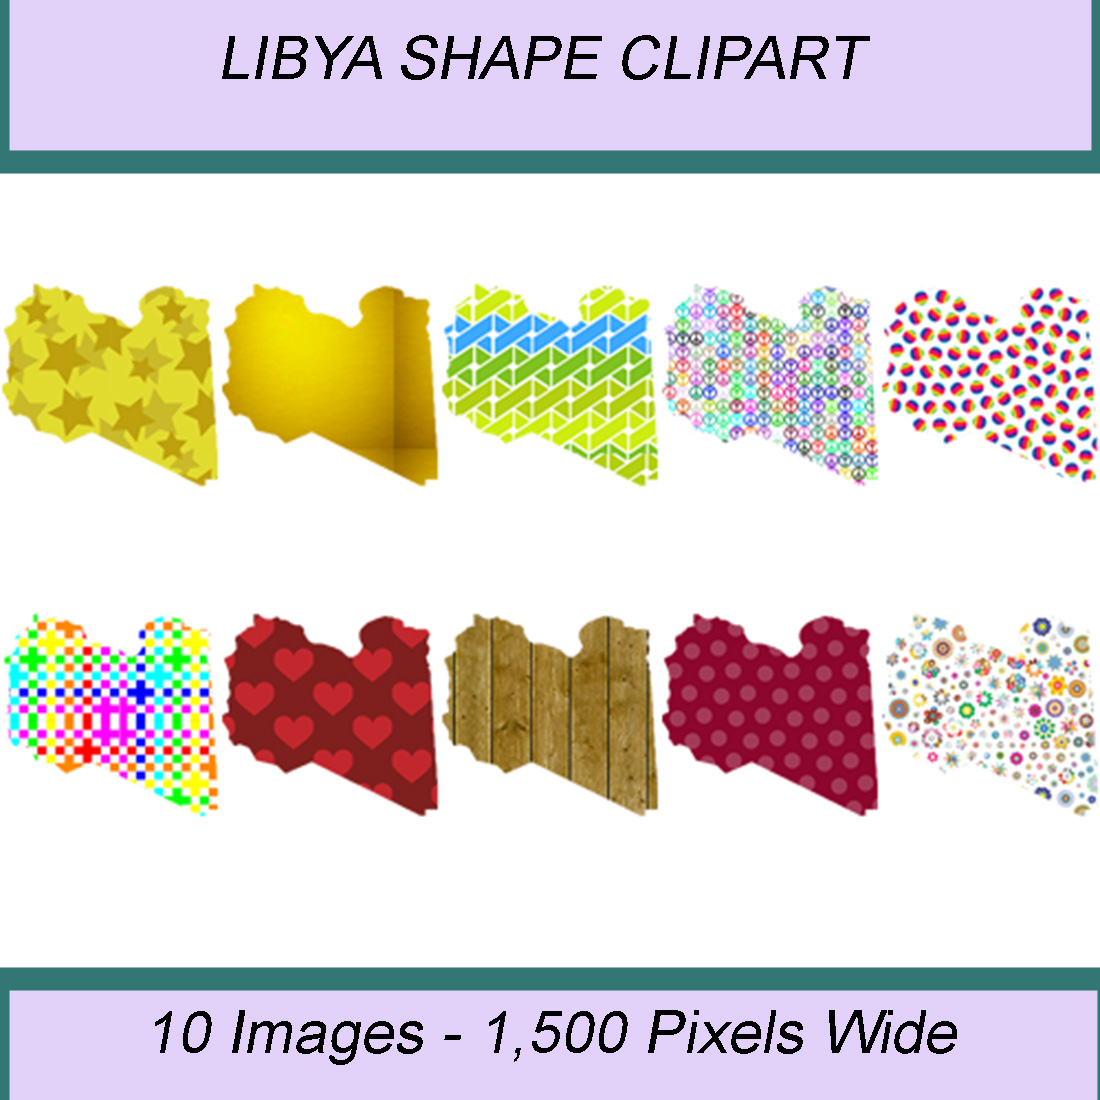 LIBYA SHAPE CLIPART ICONS cover image.